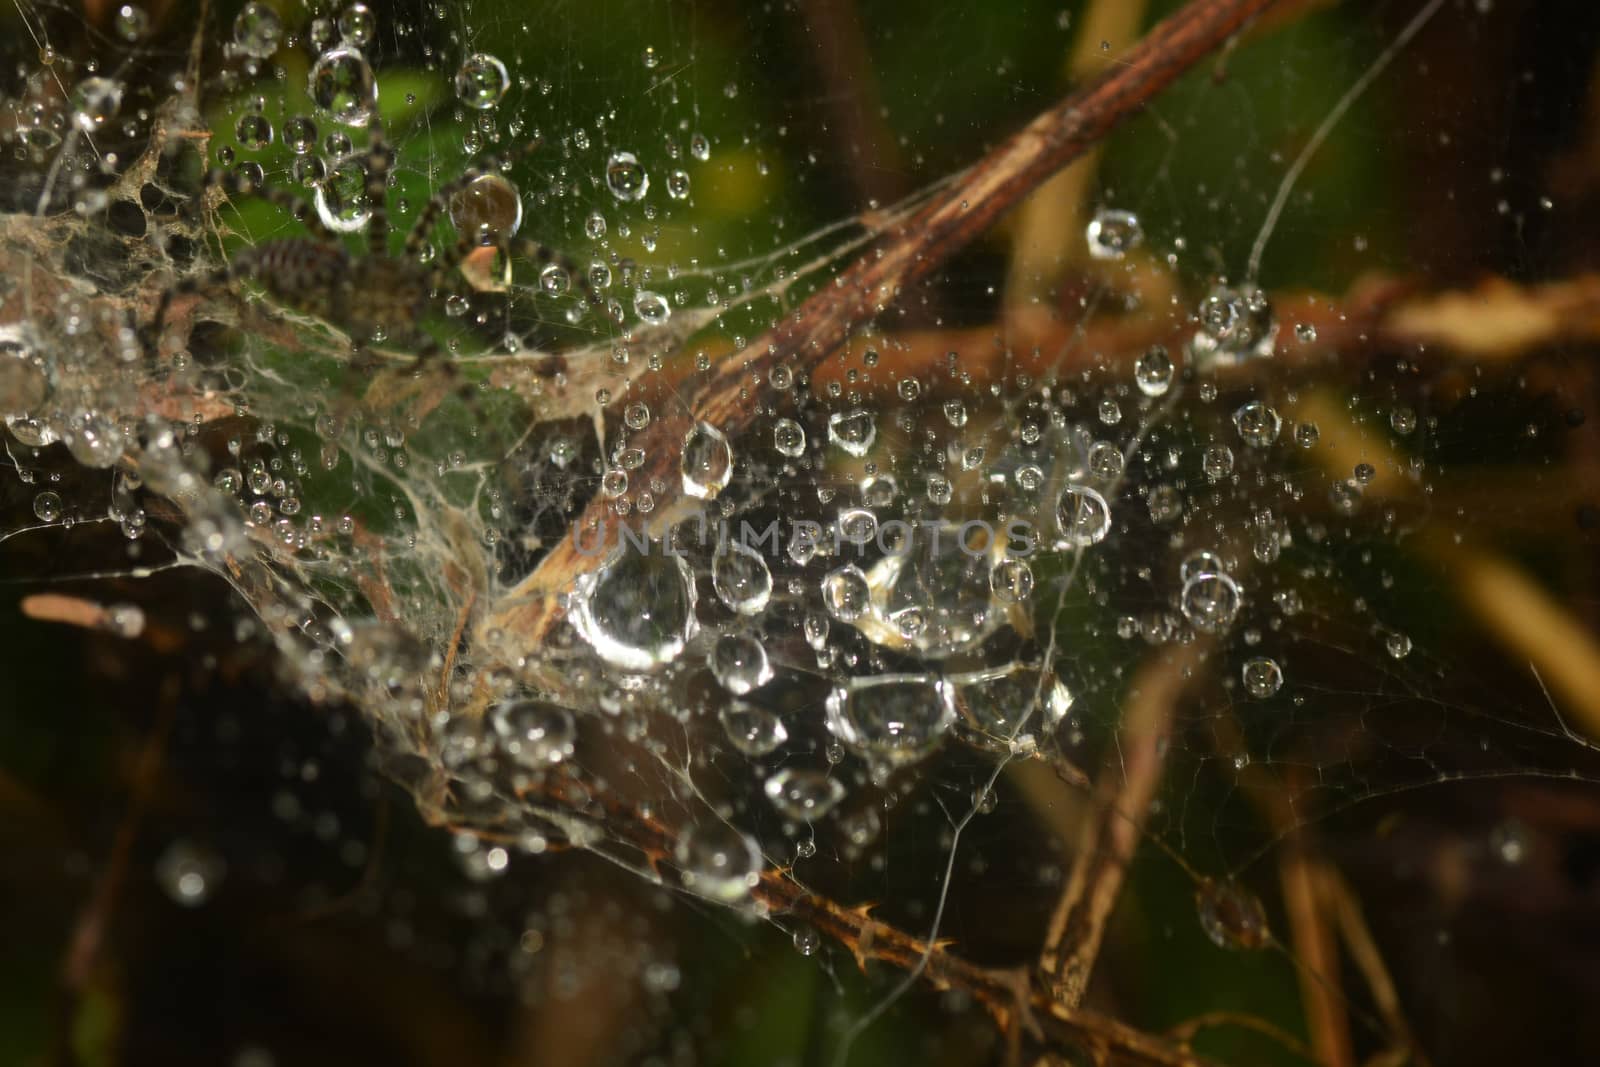 Water droplets on cobweb by ideation90